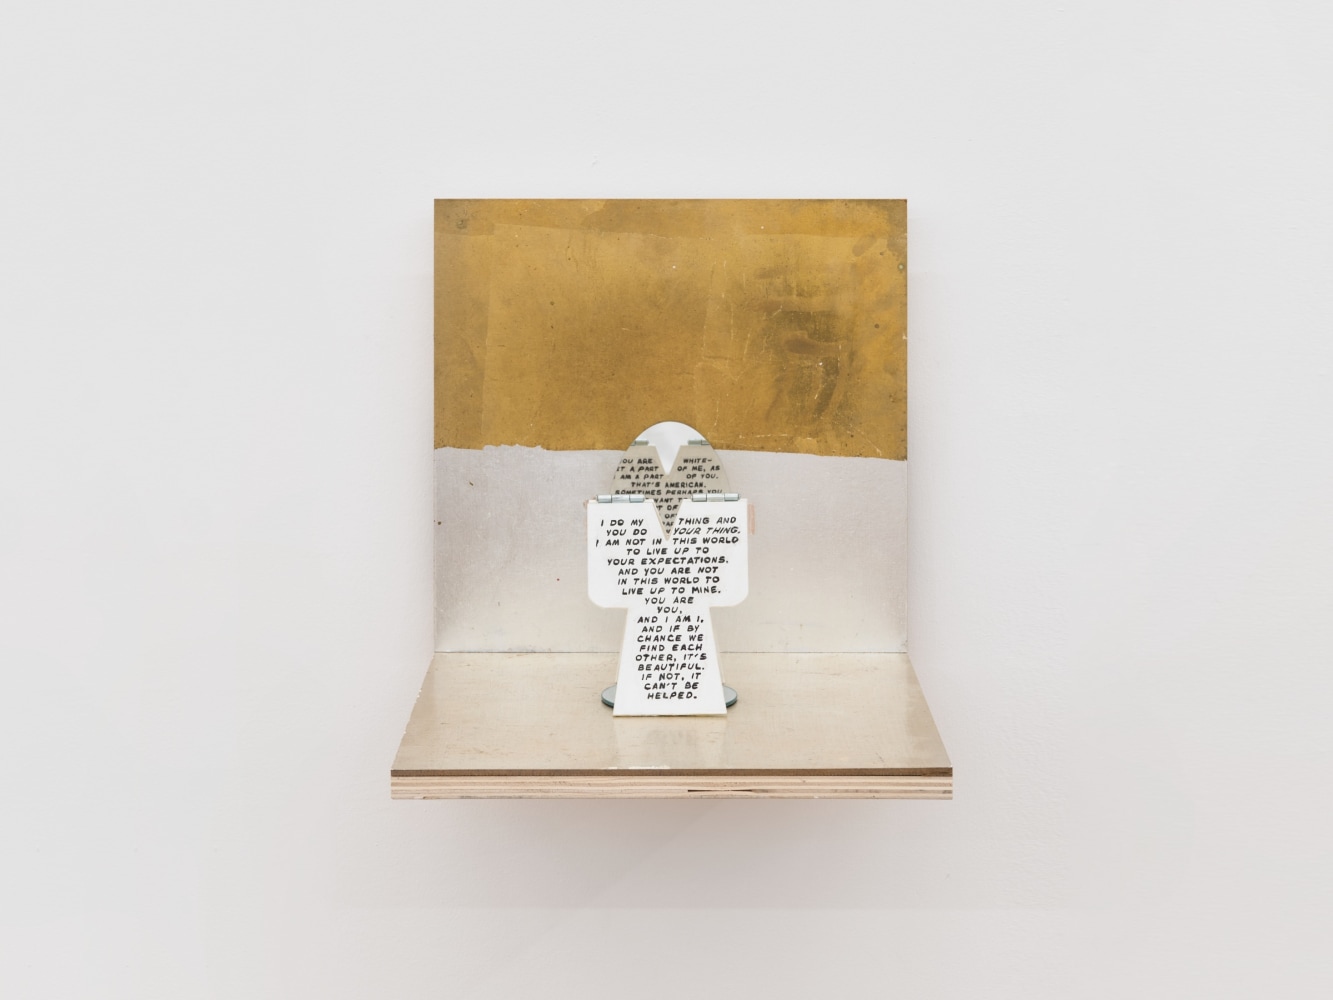 Aviva&amp;nbsp;Silverman
You are you, and I am I, 2018
plywood, silver and gold leaf, hinges, mirror
11.50h x 11.25w x 11.50d in
29.21h x 28.57w x 29.21d cm